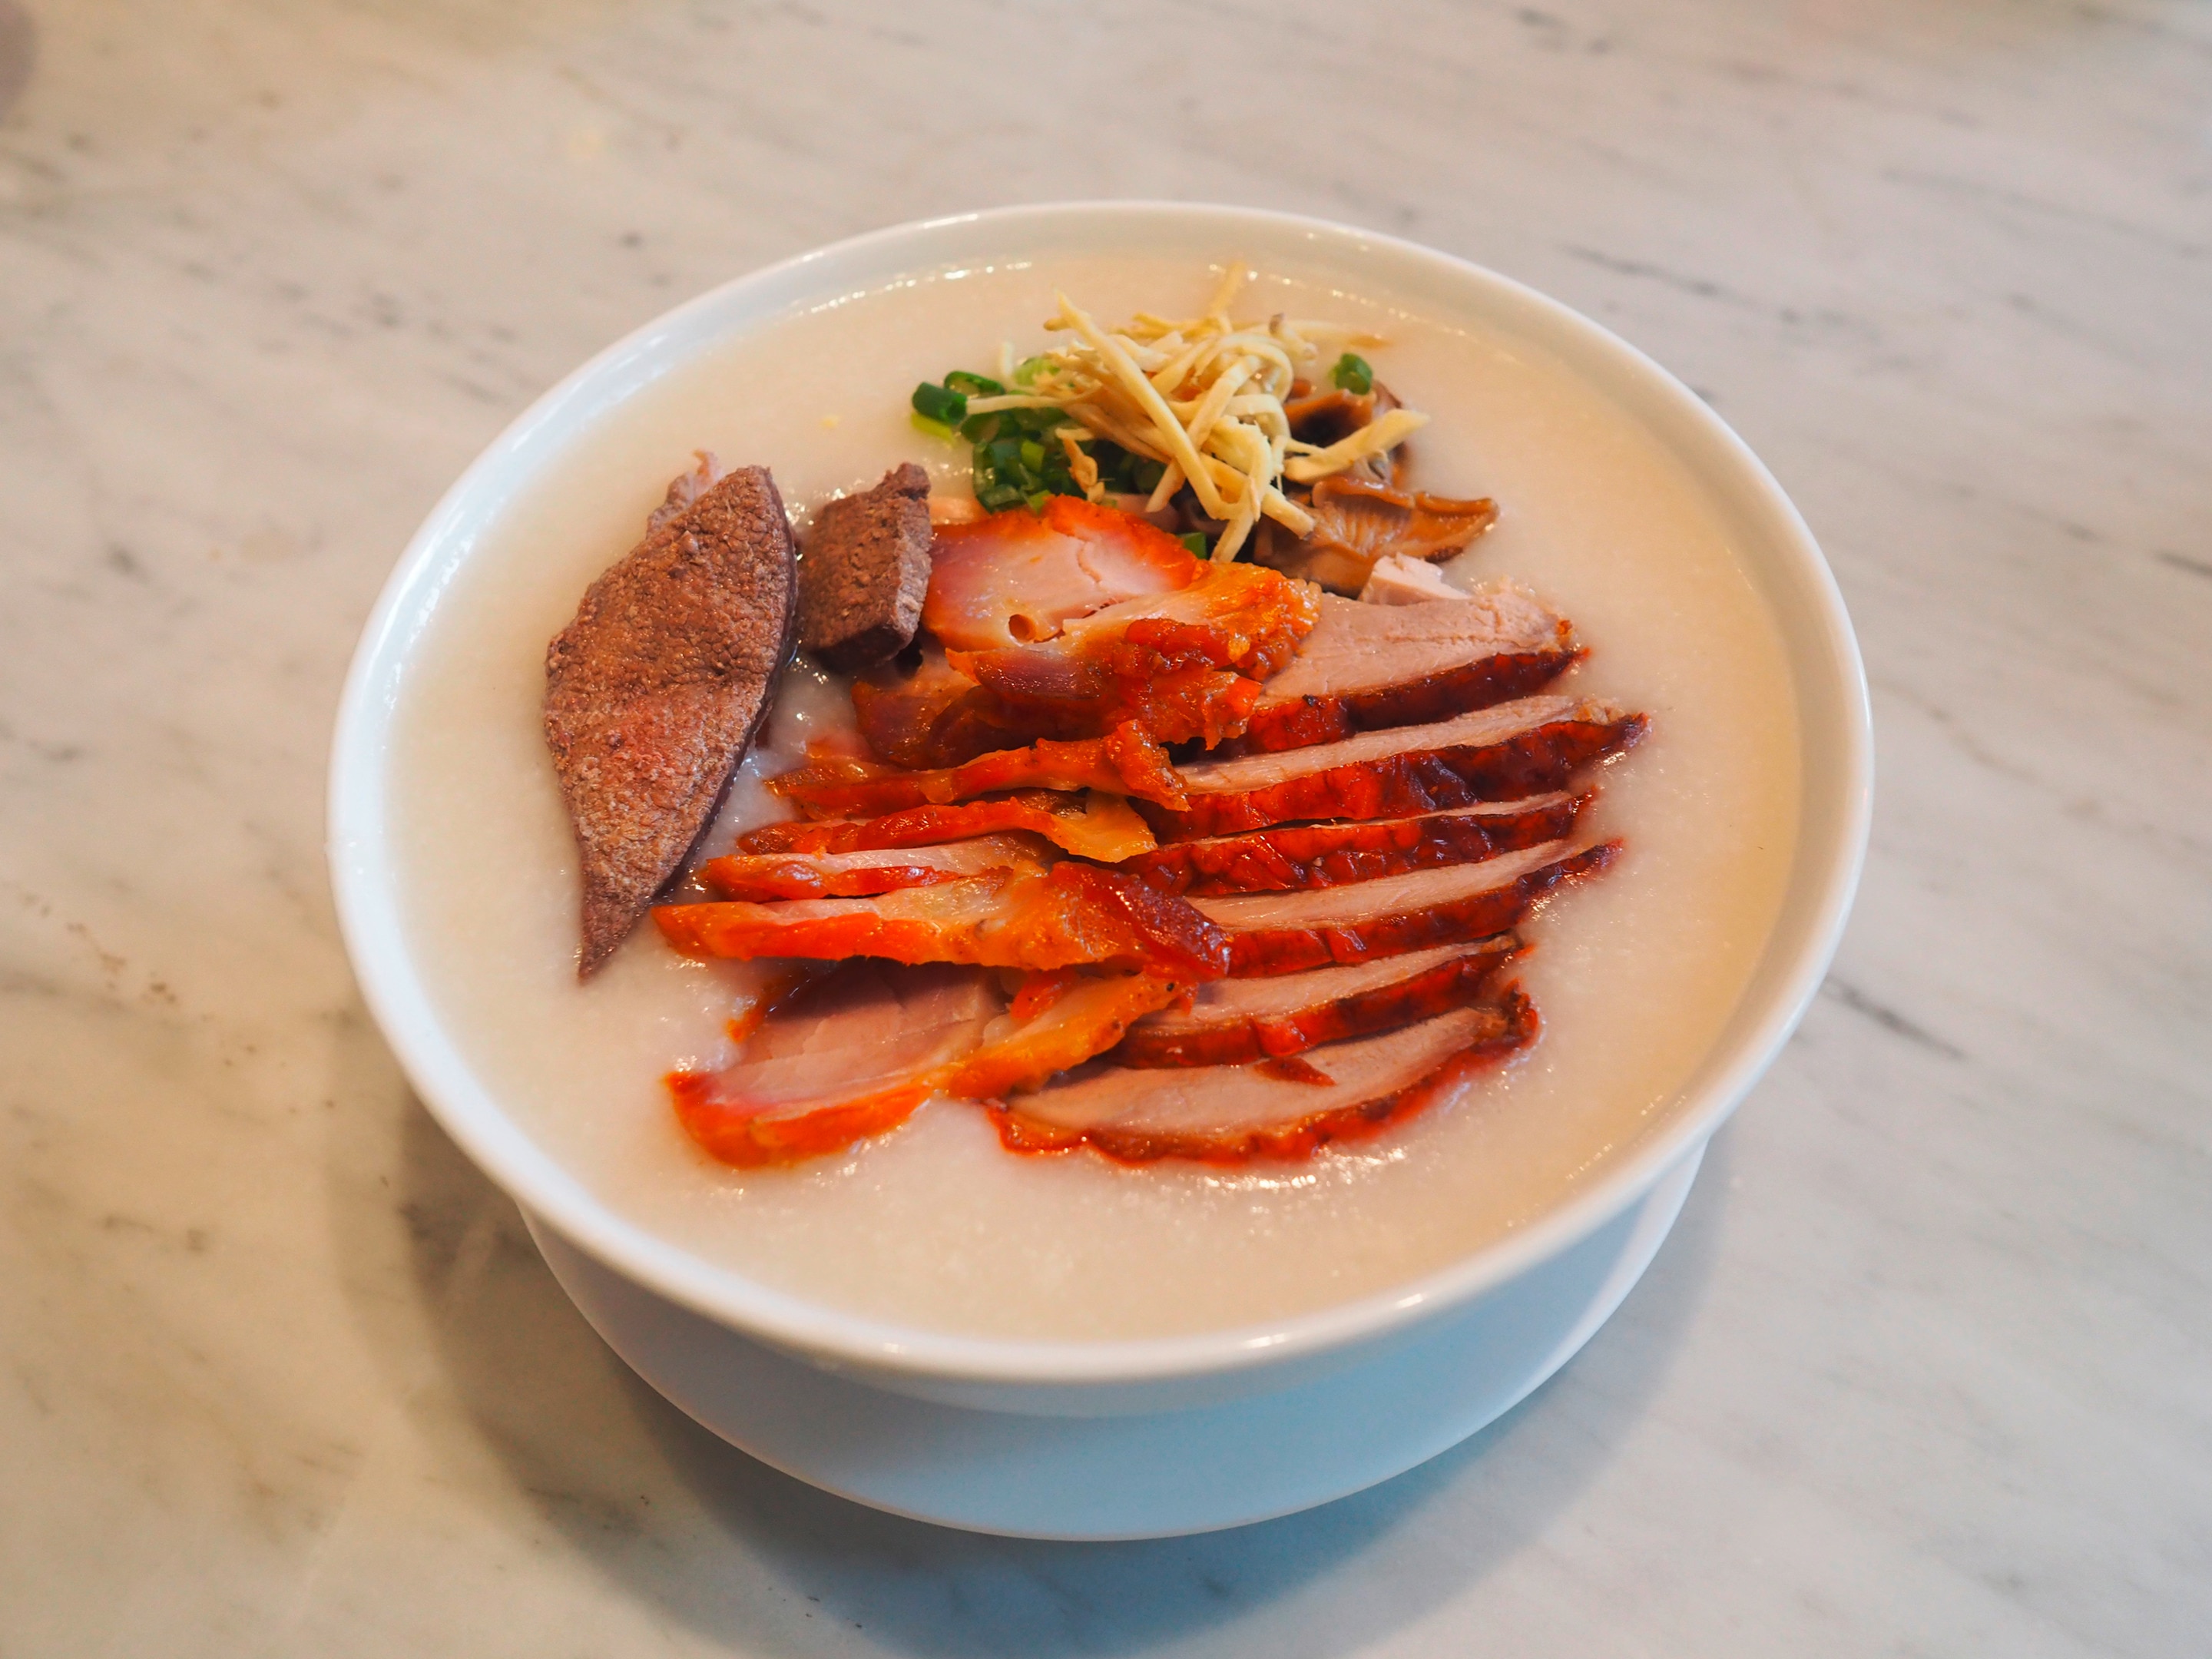 Roasted duck slices over a large serving of congee